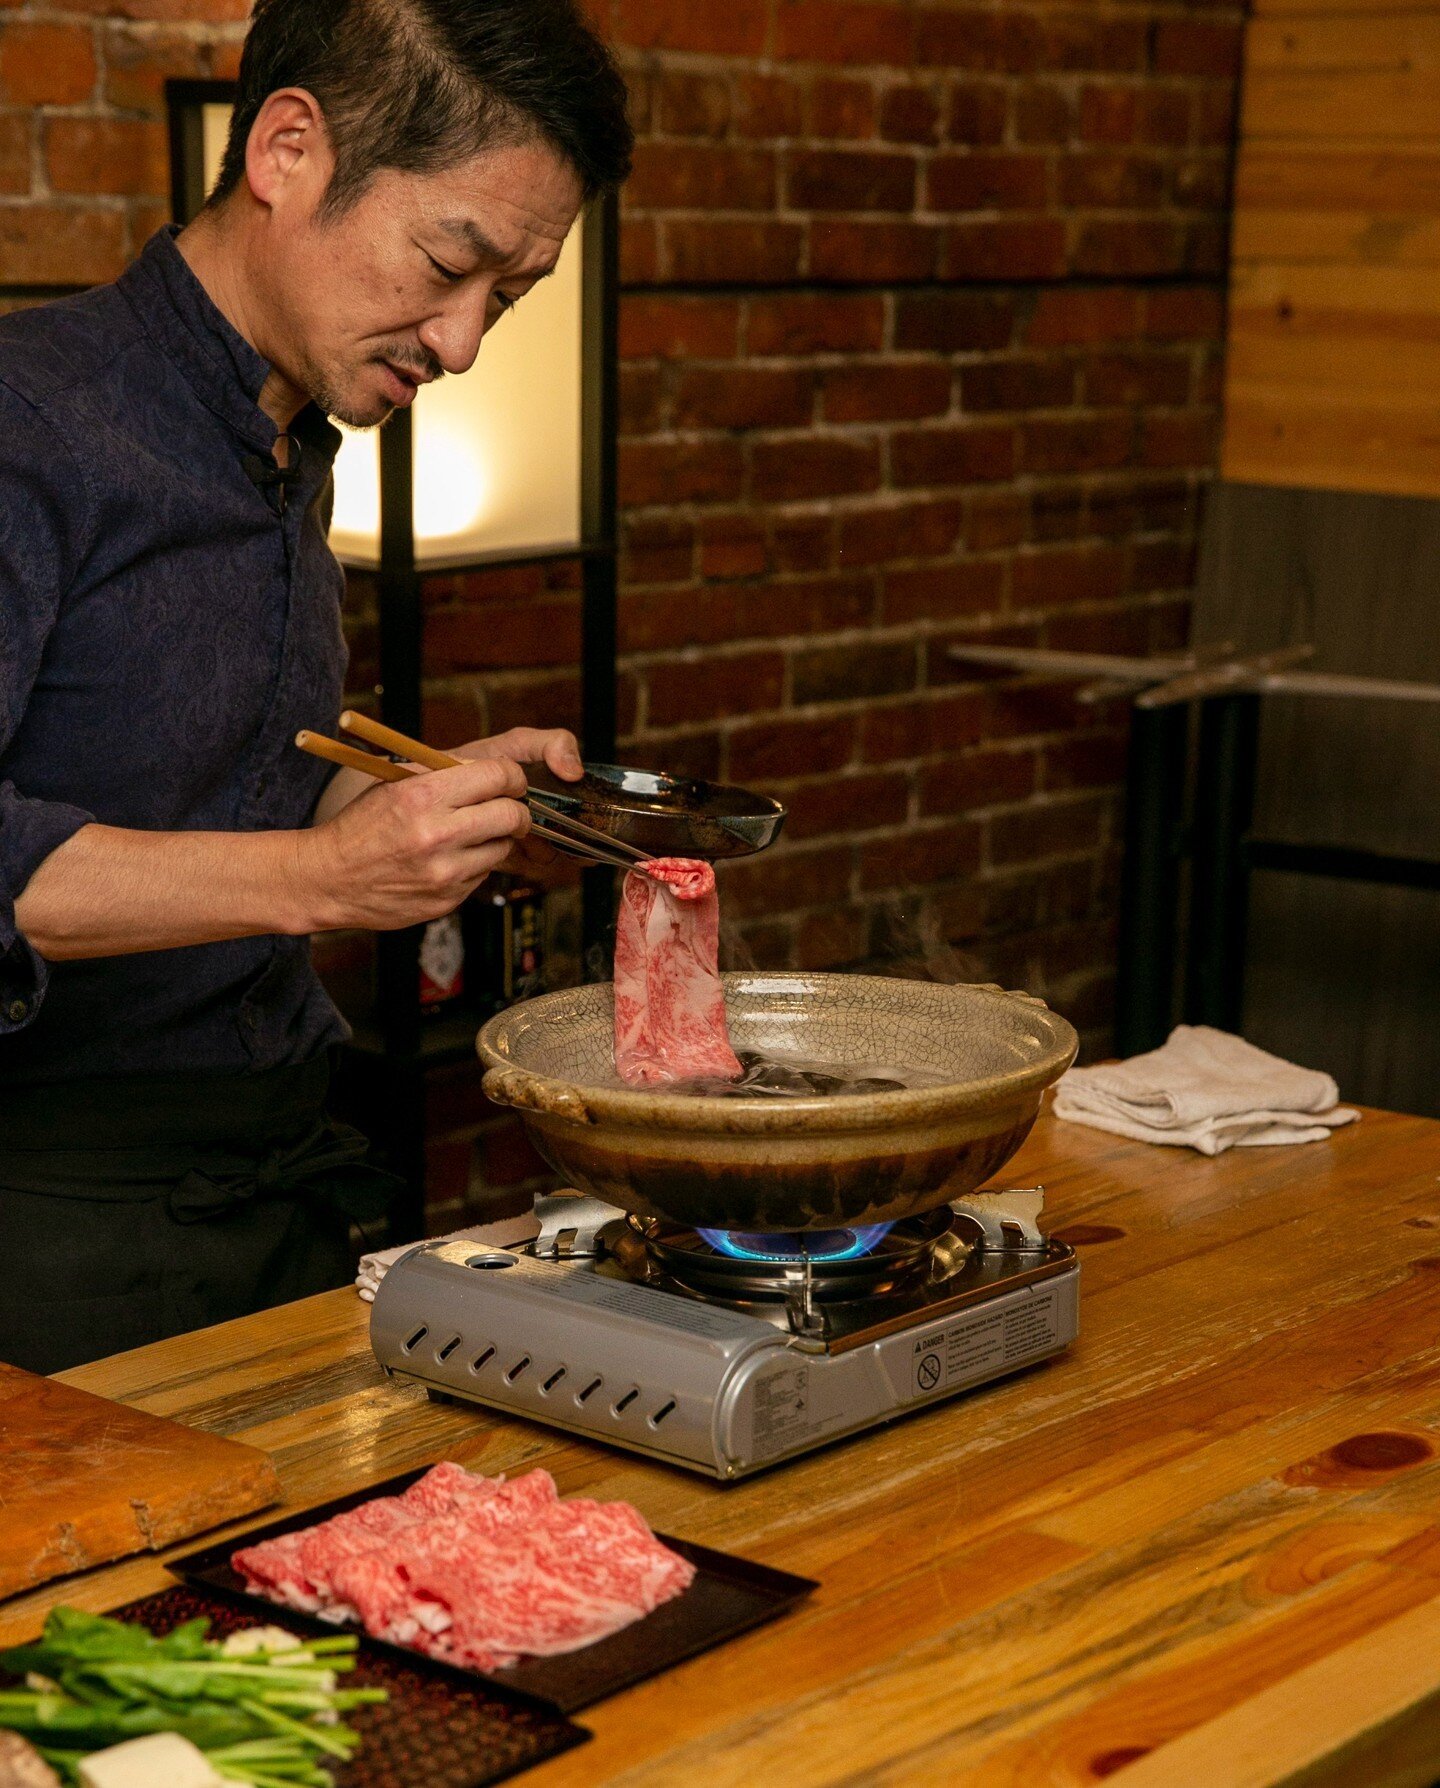 For grilling enthusiasts or hotpot lovers at home, visit us and get your favourite Wagyu cuts with us.

From yakiniku cuts to shabu-shabu cuts, at Aburi Market, you'll find a freshly cut selection. Pick yours from our counter and enjoy 10% off on Wed